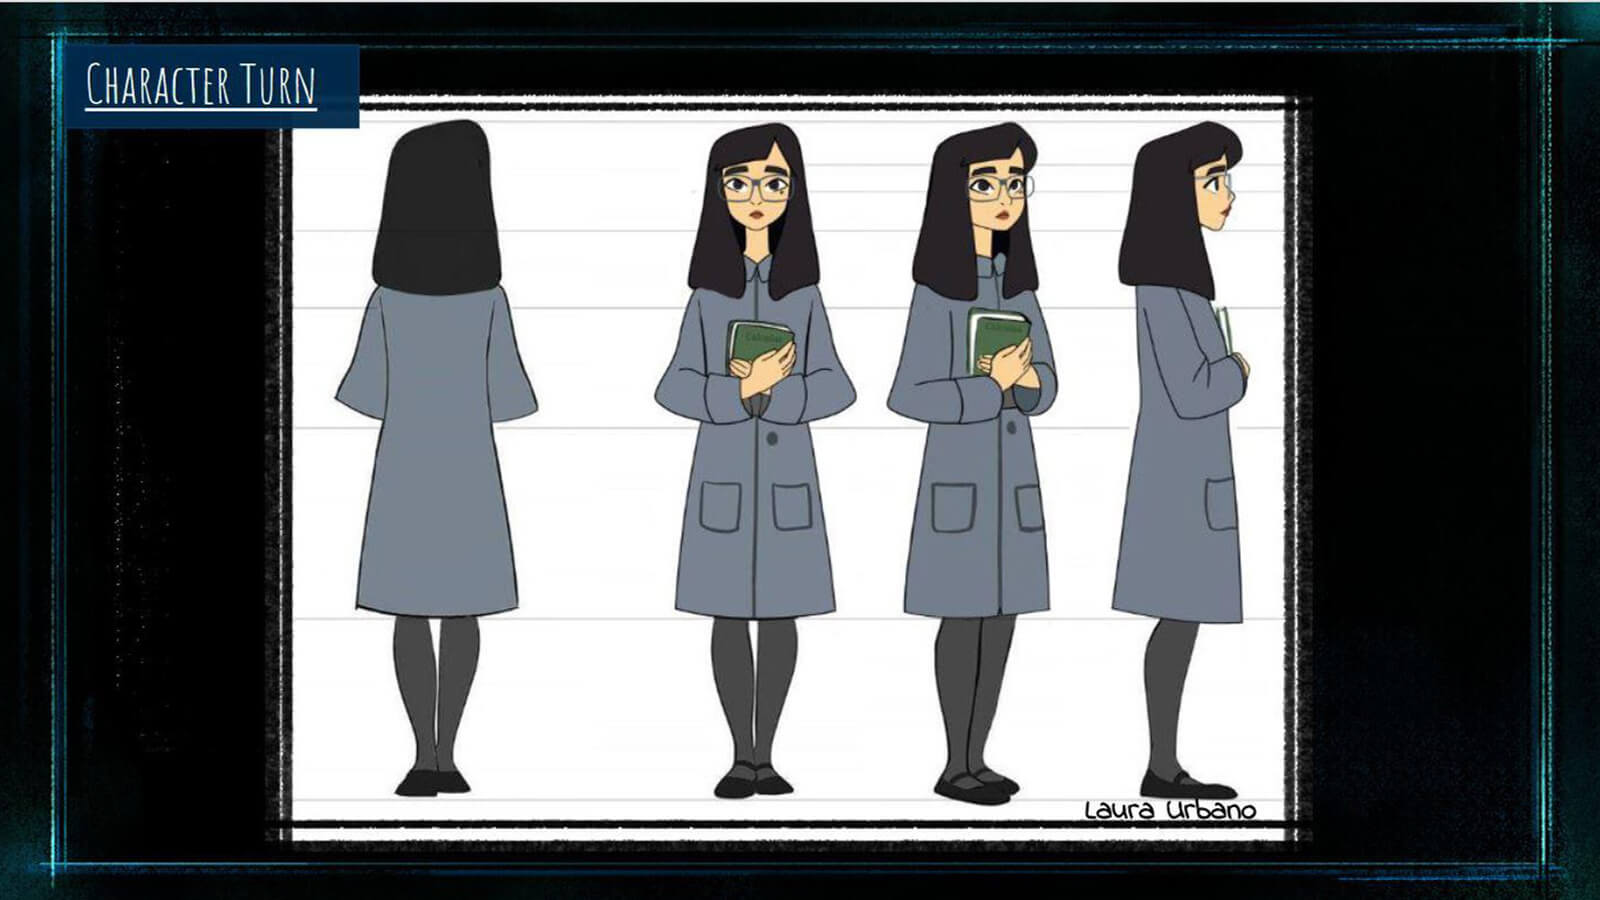 A "Character Turn" sheet for the film's main character Tristesse, showing her from a front, back, and side profile. 